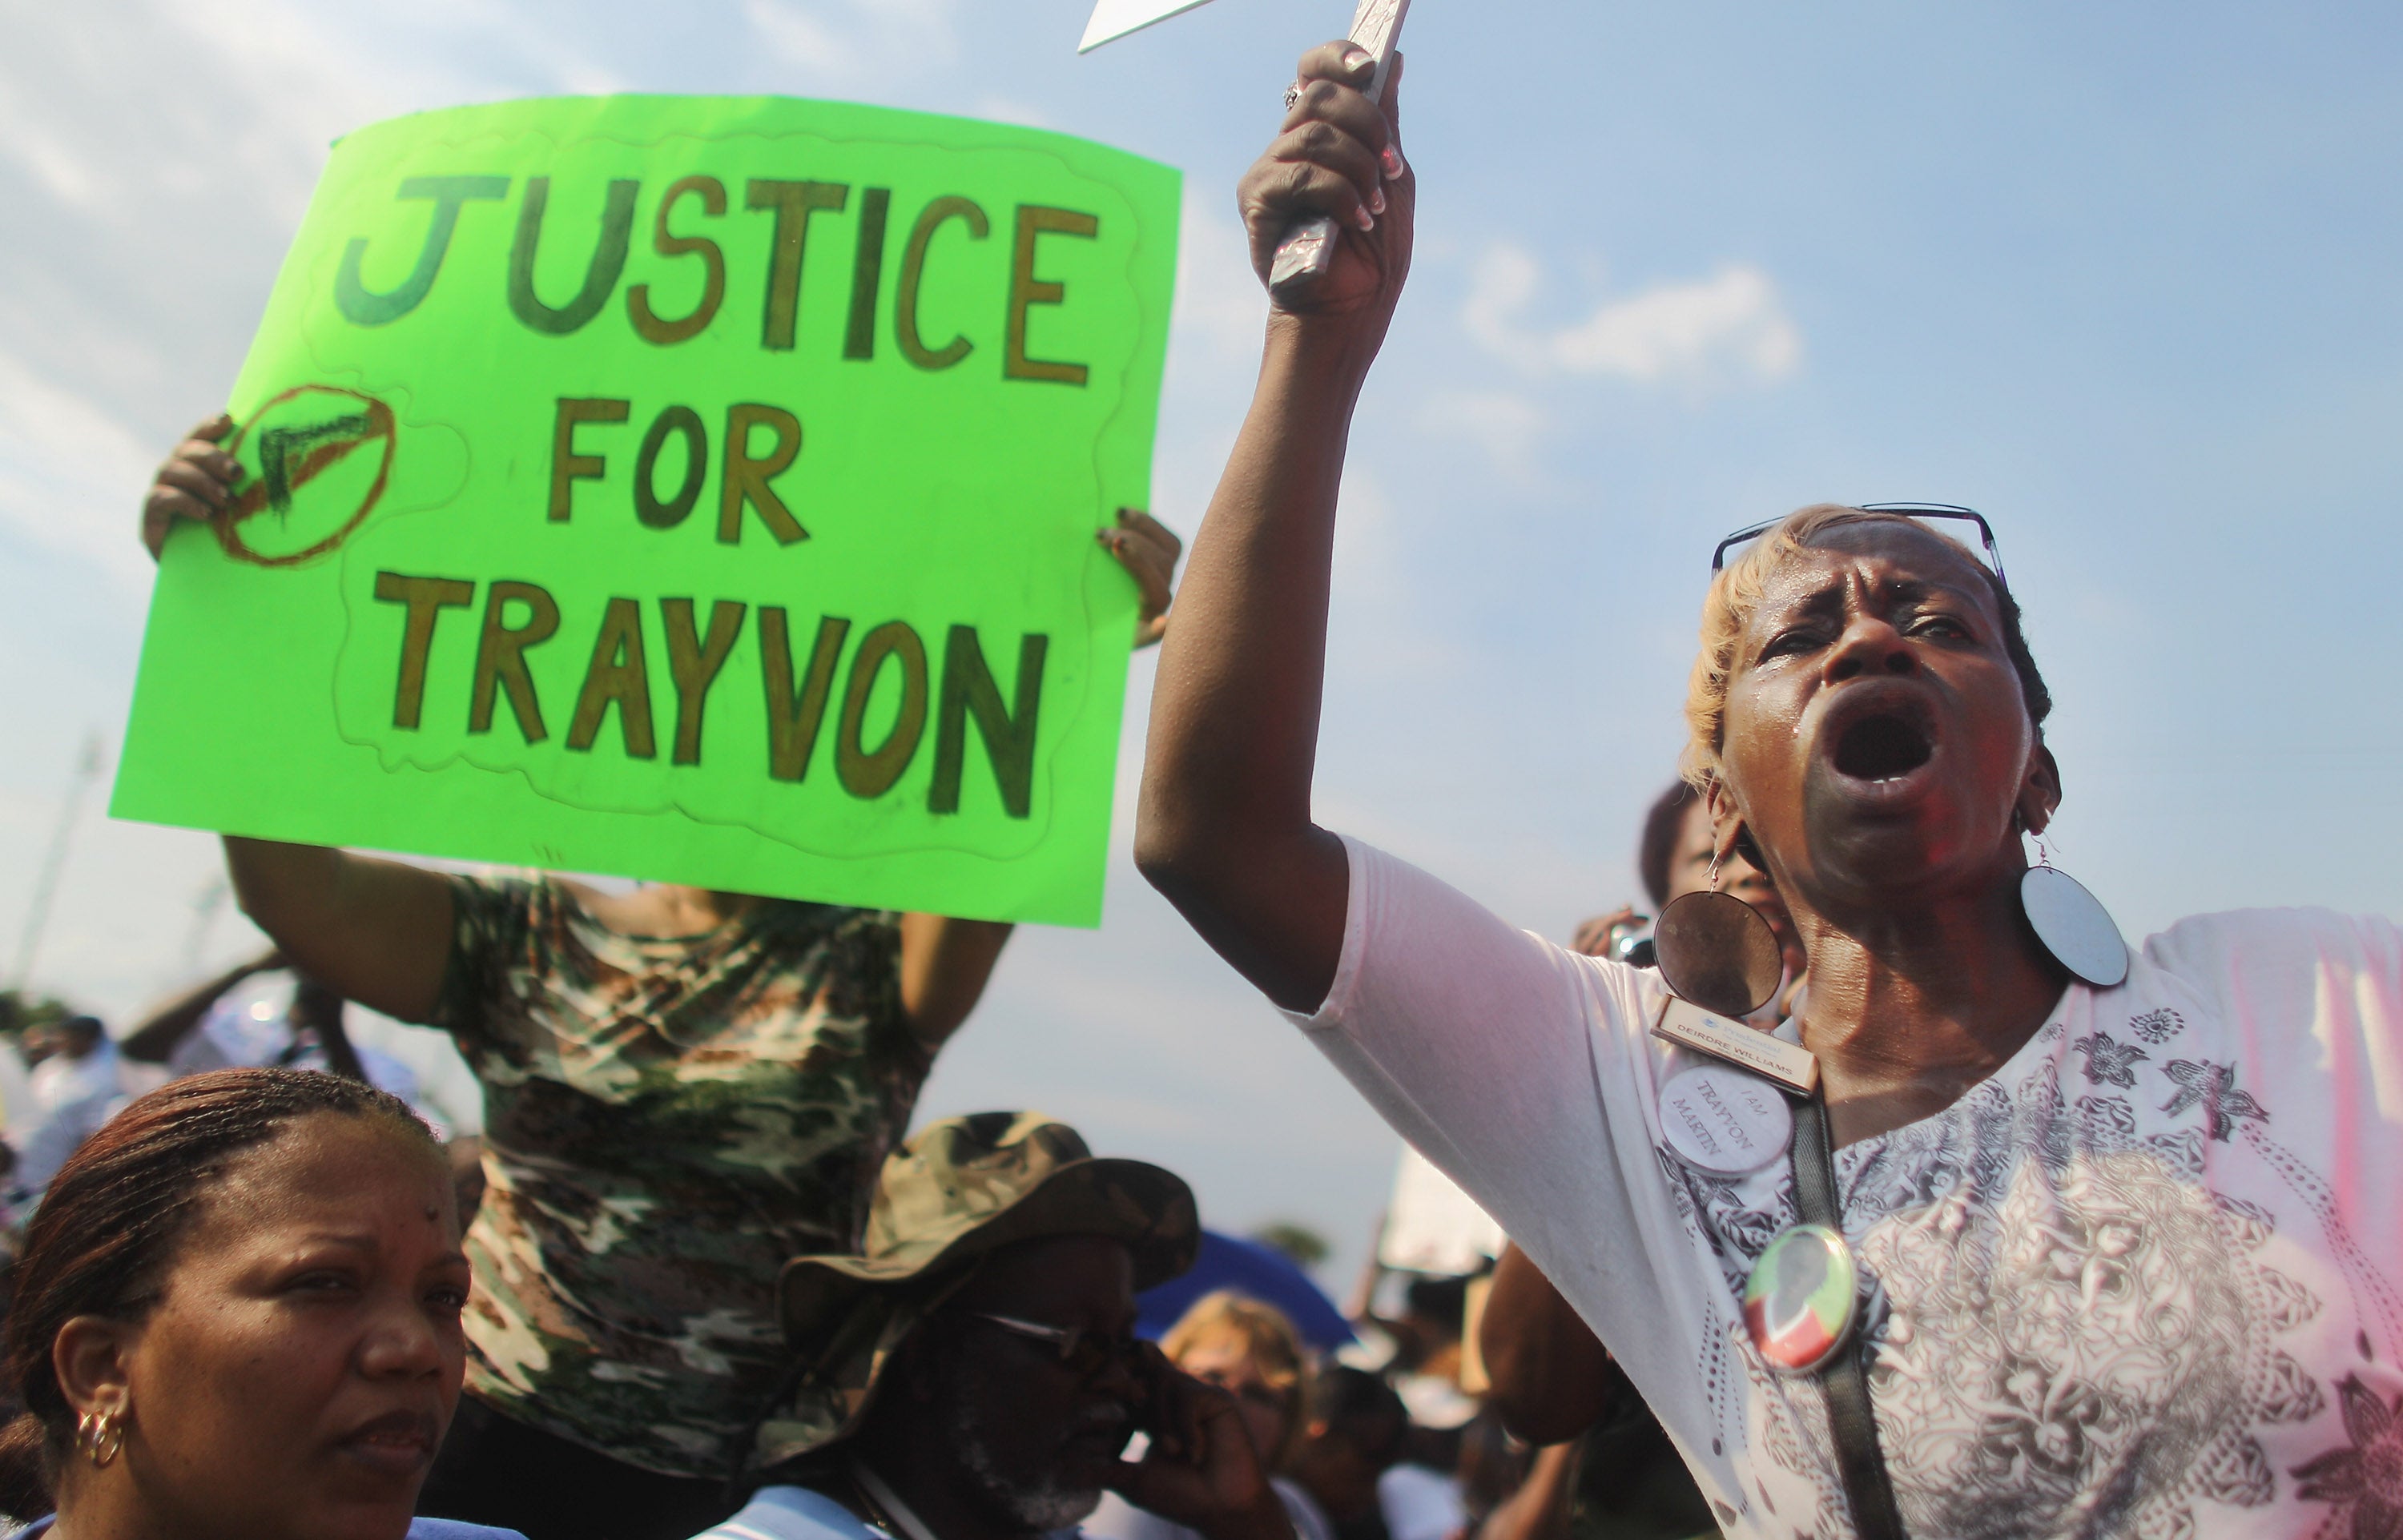 The Trayvon Martin Case Brings Out the Activist in All of Us